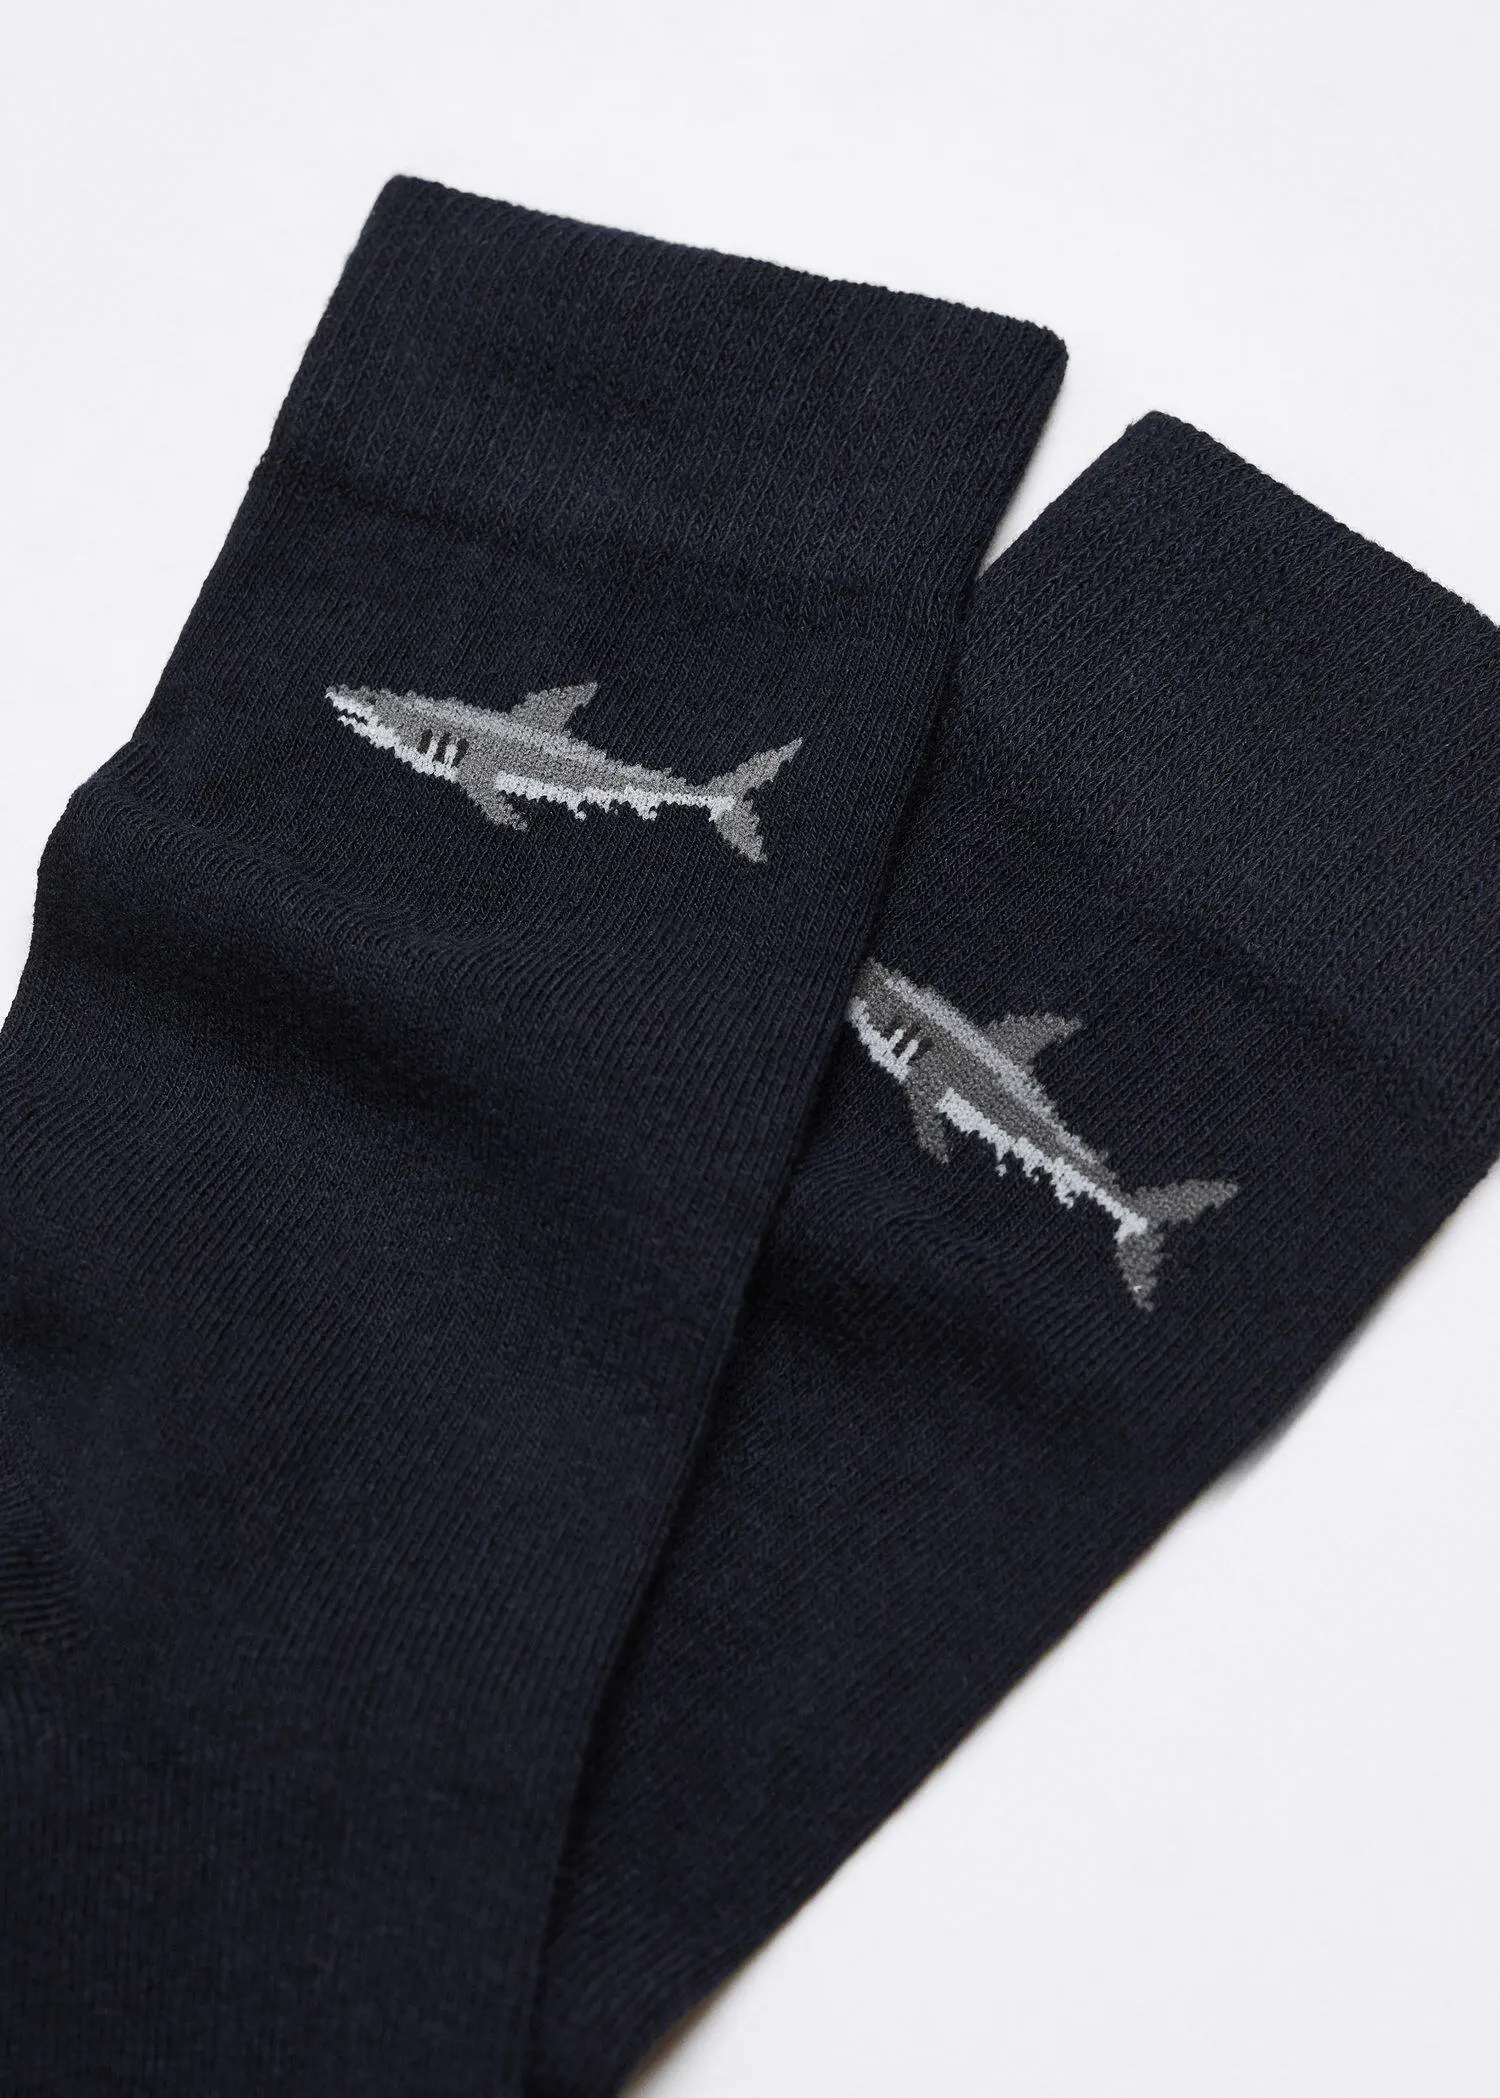 Mango Shark-embroidered cotton socks. a pair of black socks with a picture of a shark. 